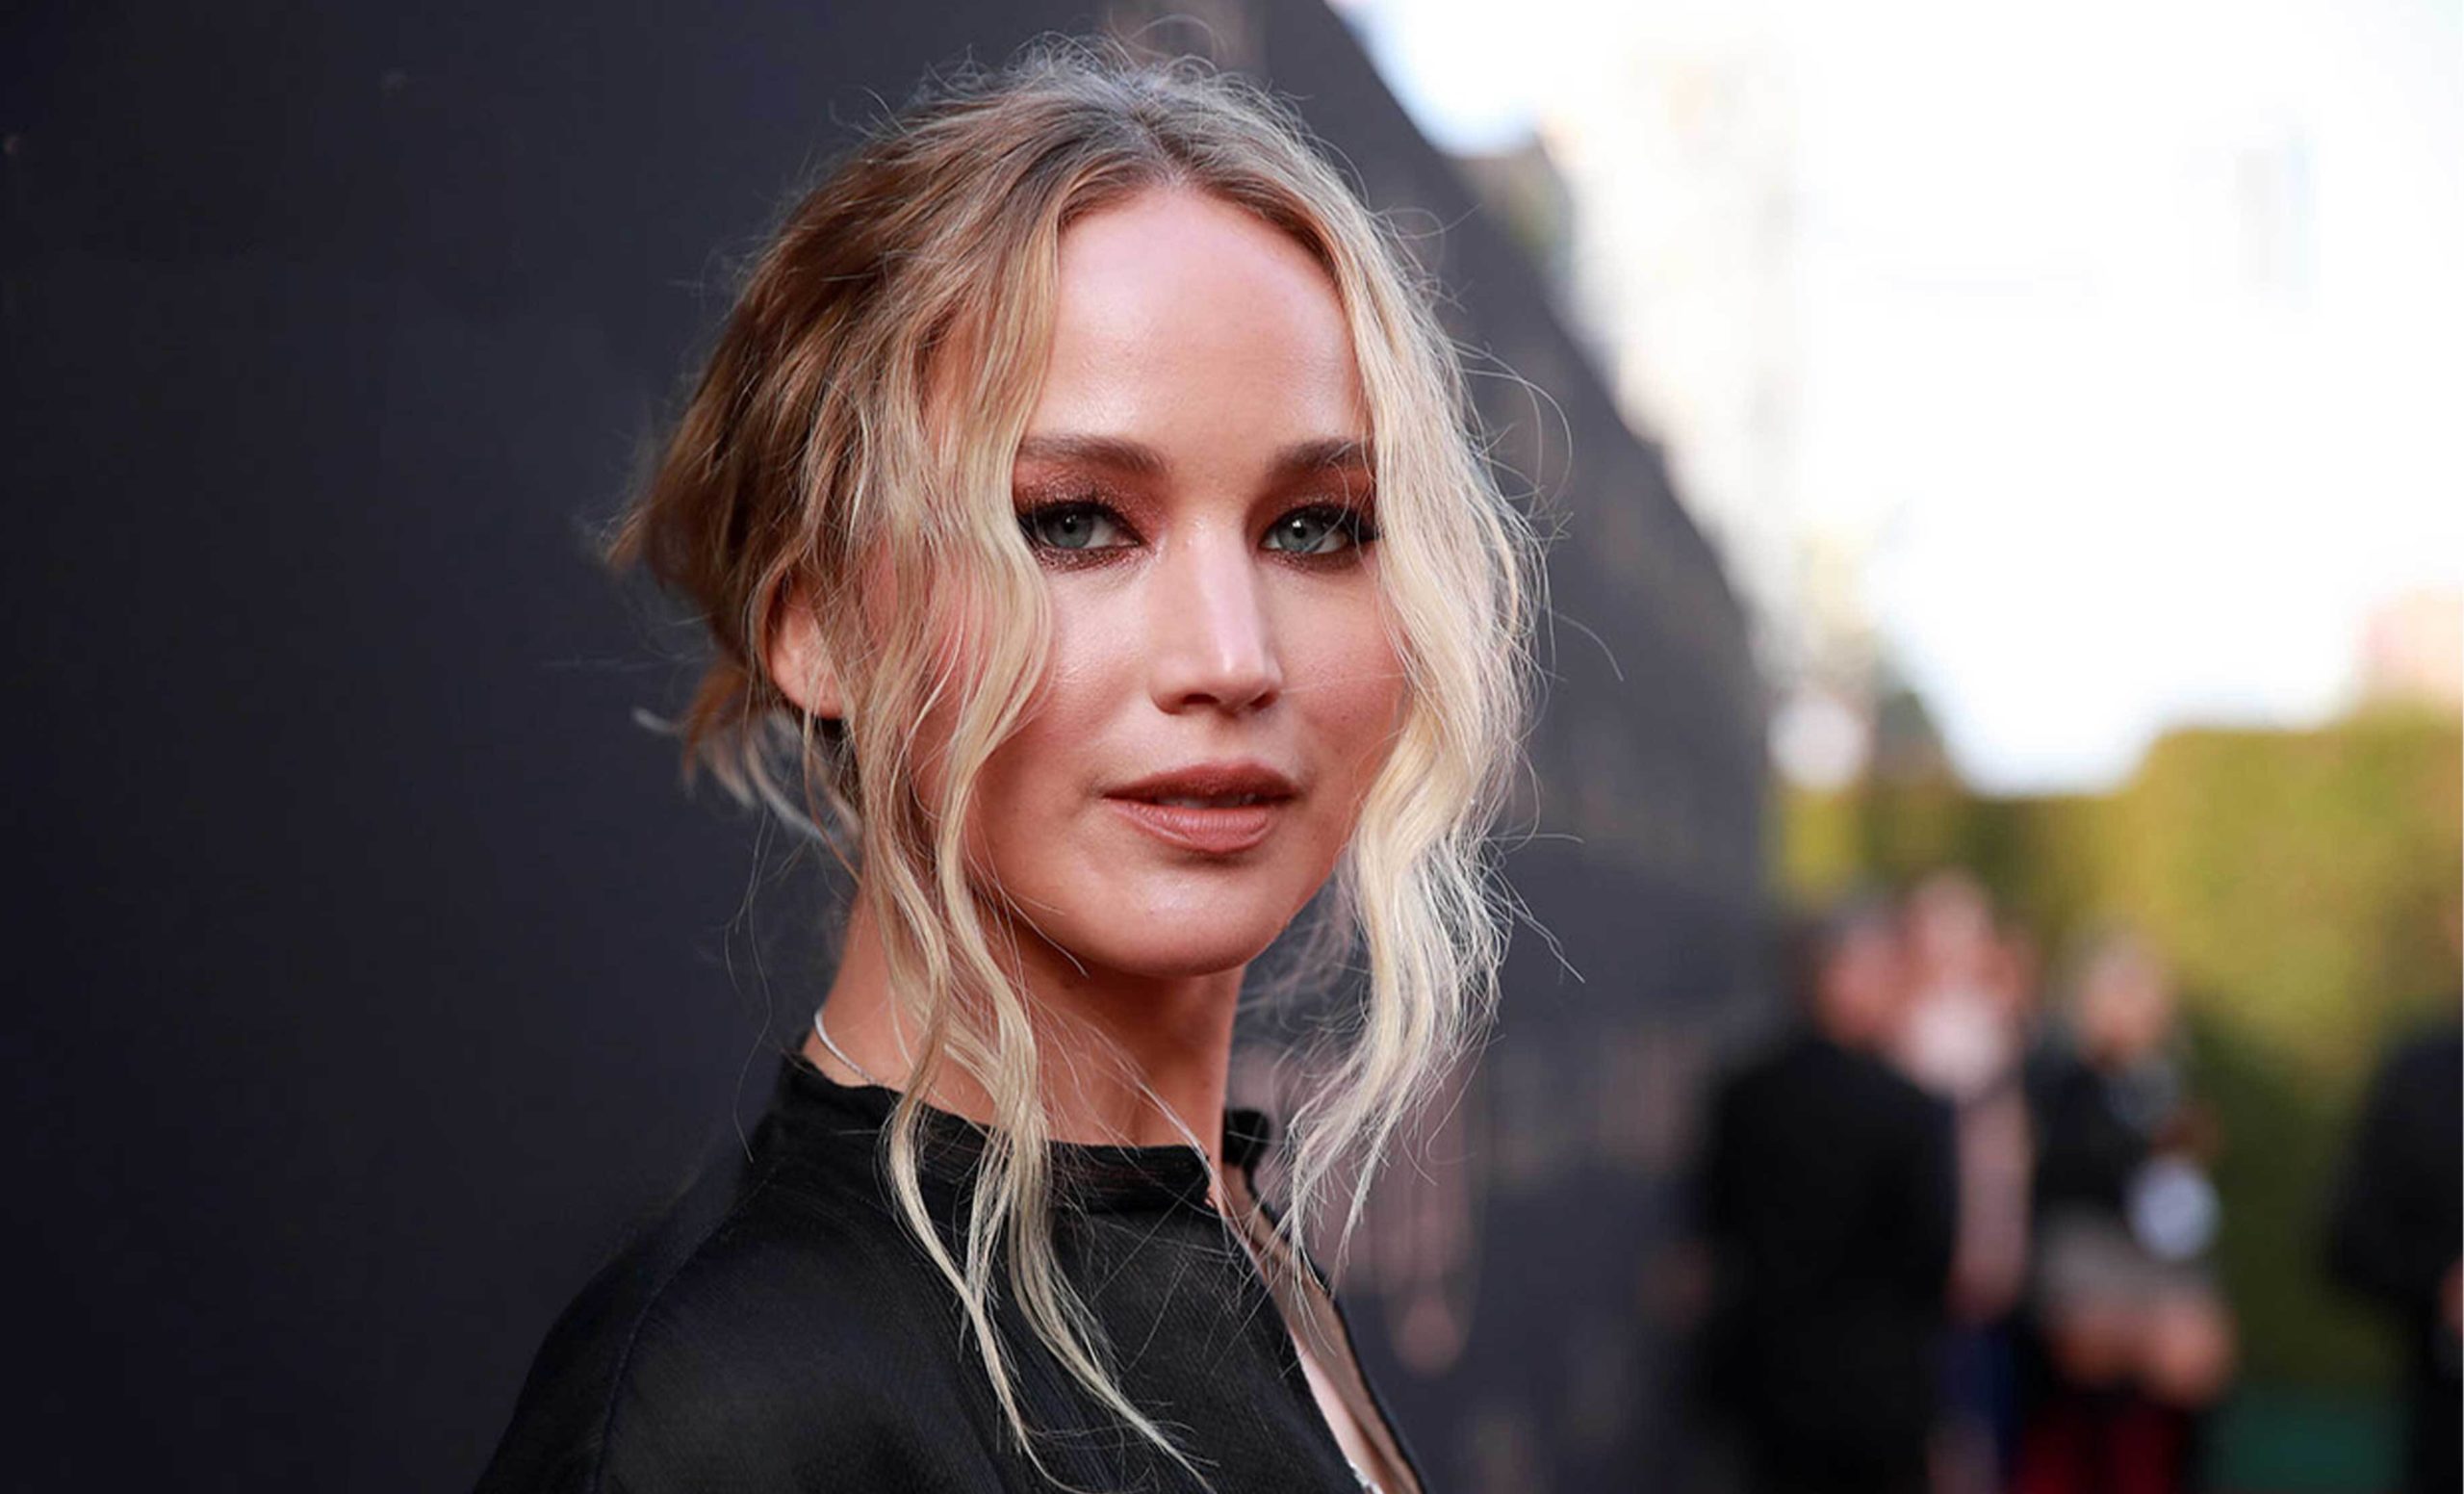 Jennifer Lawrence Opens Up About Stepping Away From The Limelight. Her Reasons Are Completely Valid!